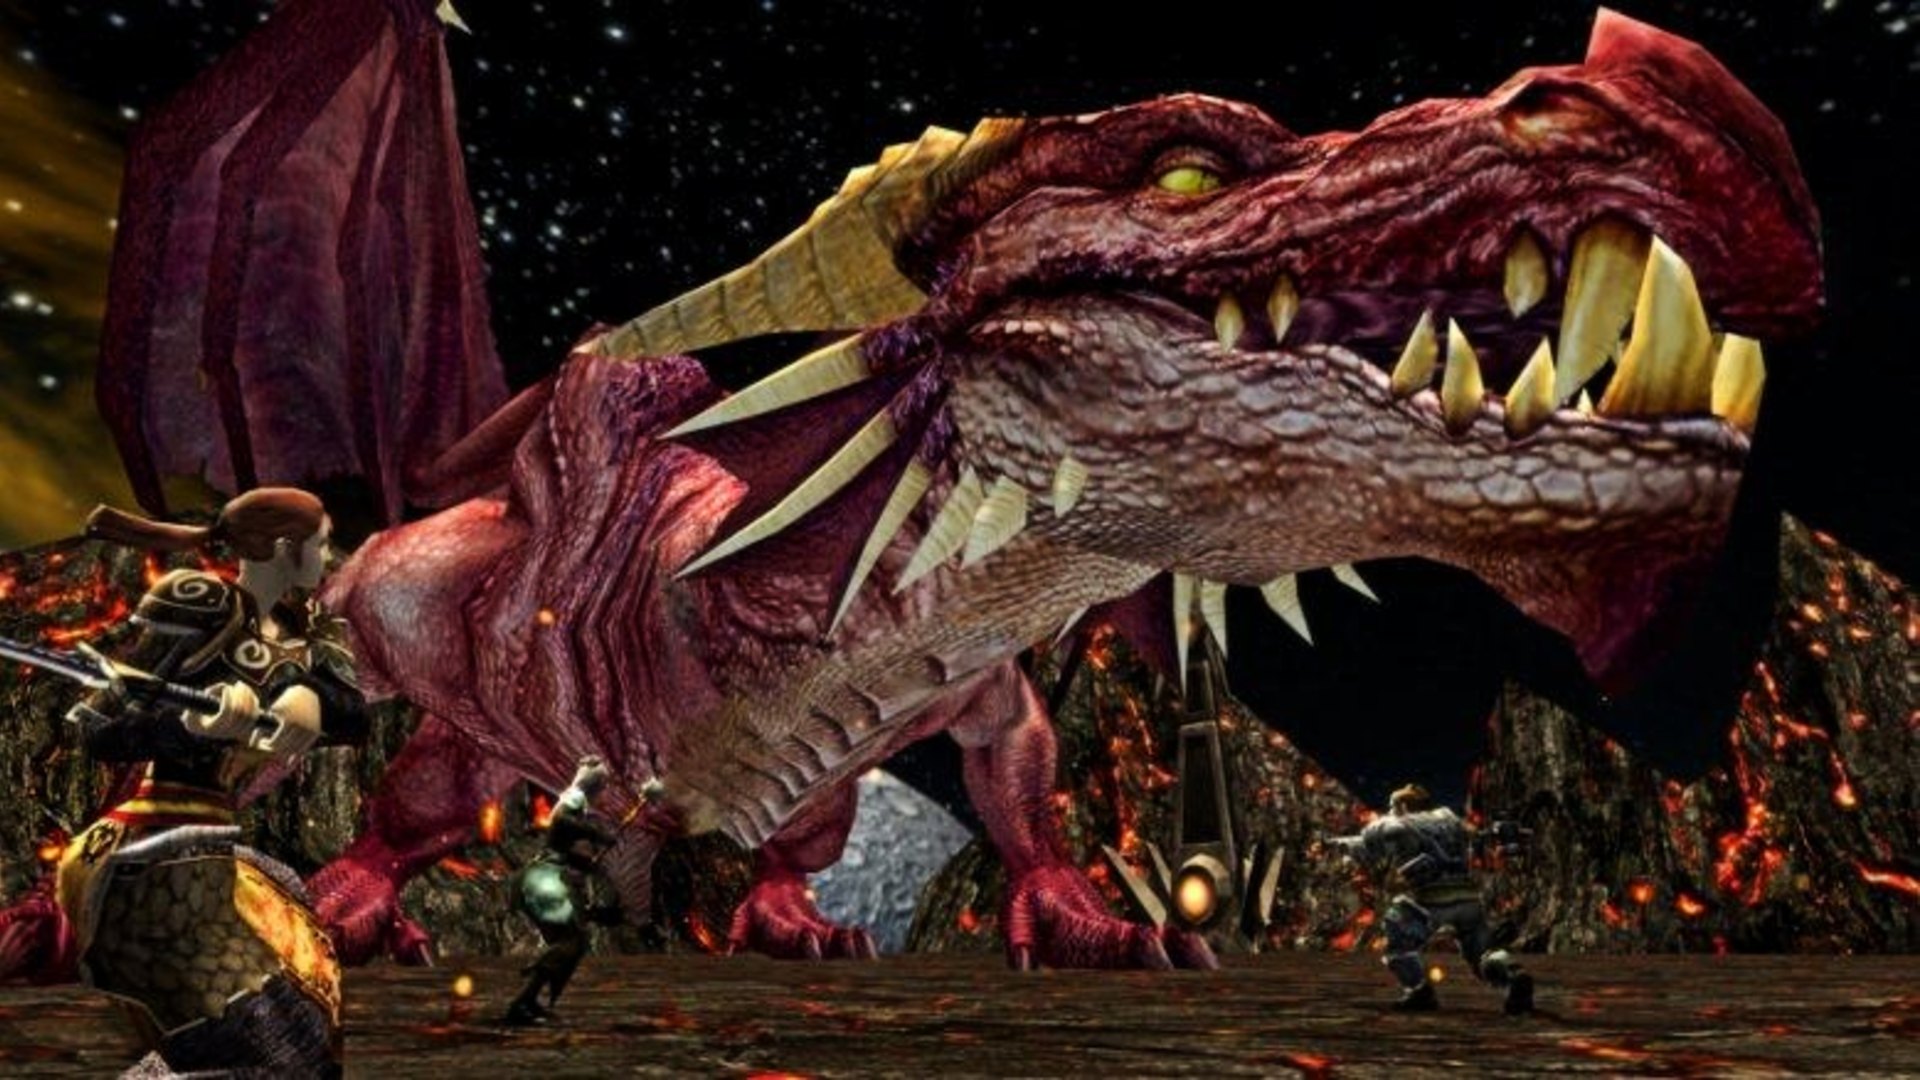 Best free PC games: D&D Online. Image shows a large dragon being fought by a group of warriors.